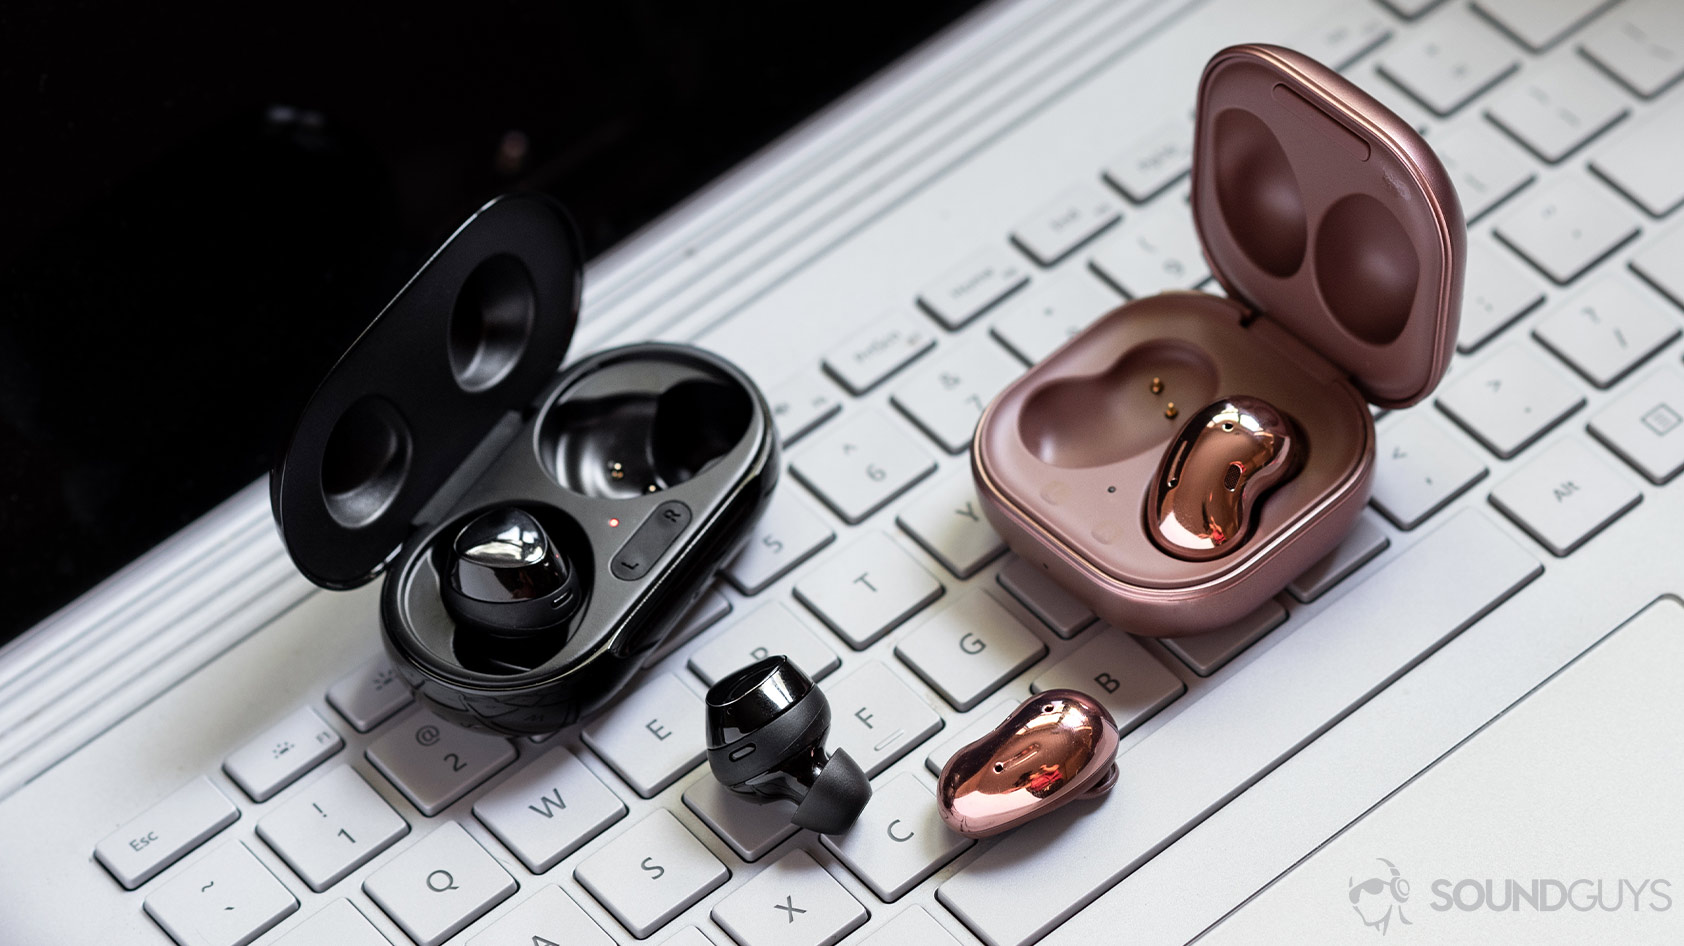 Samsung's Galaxy Buds Live Review